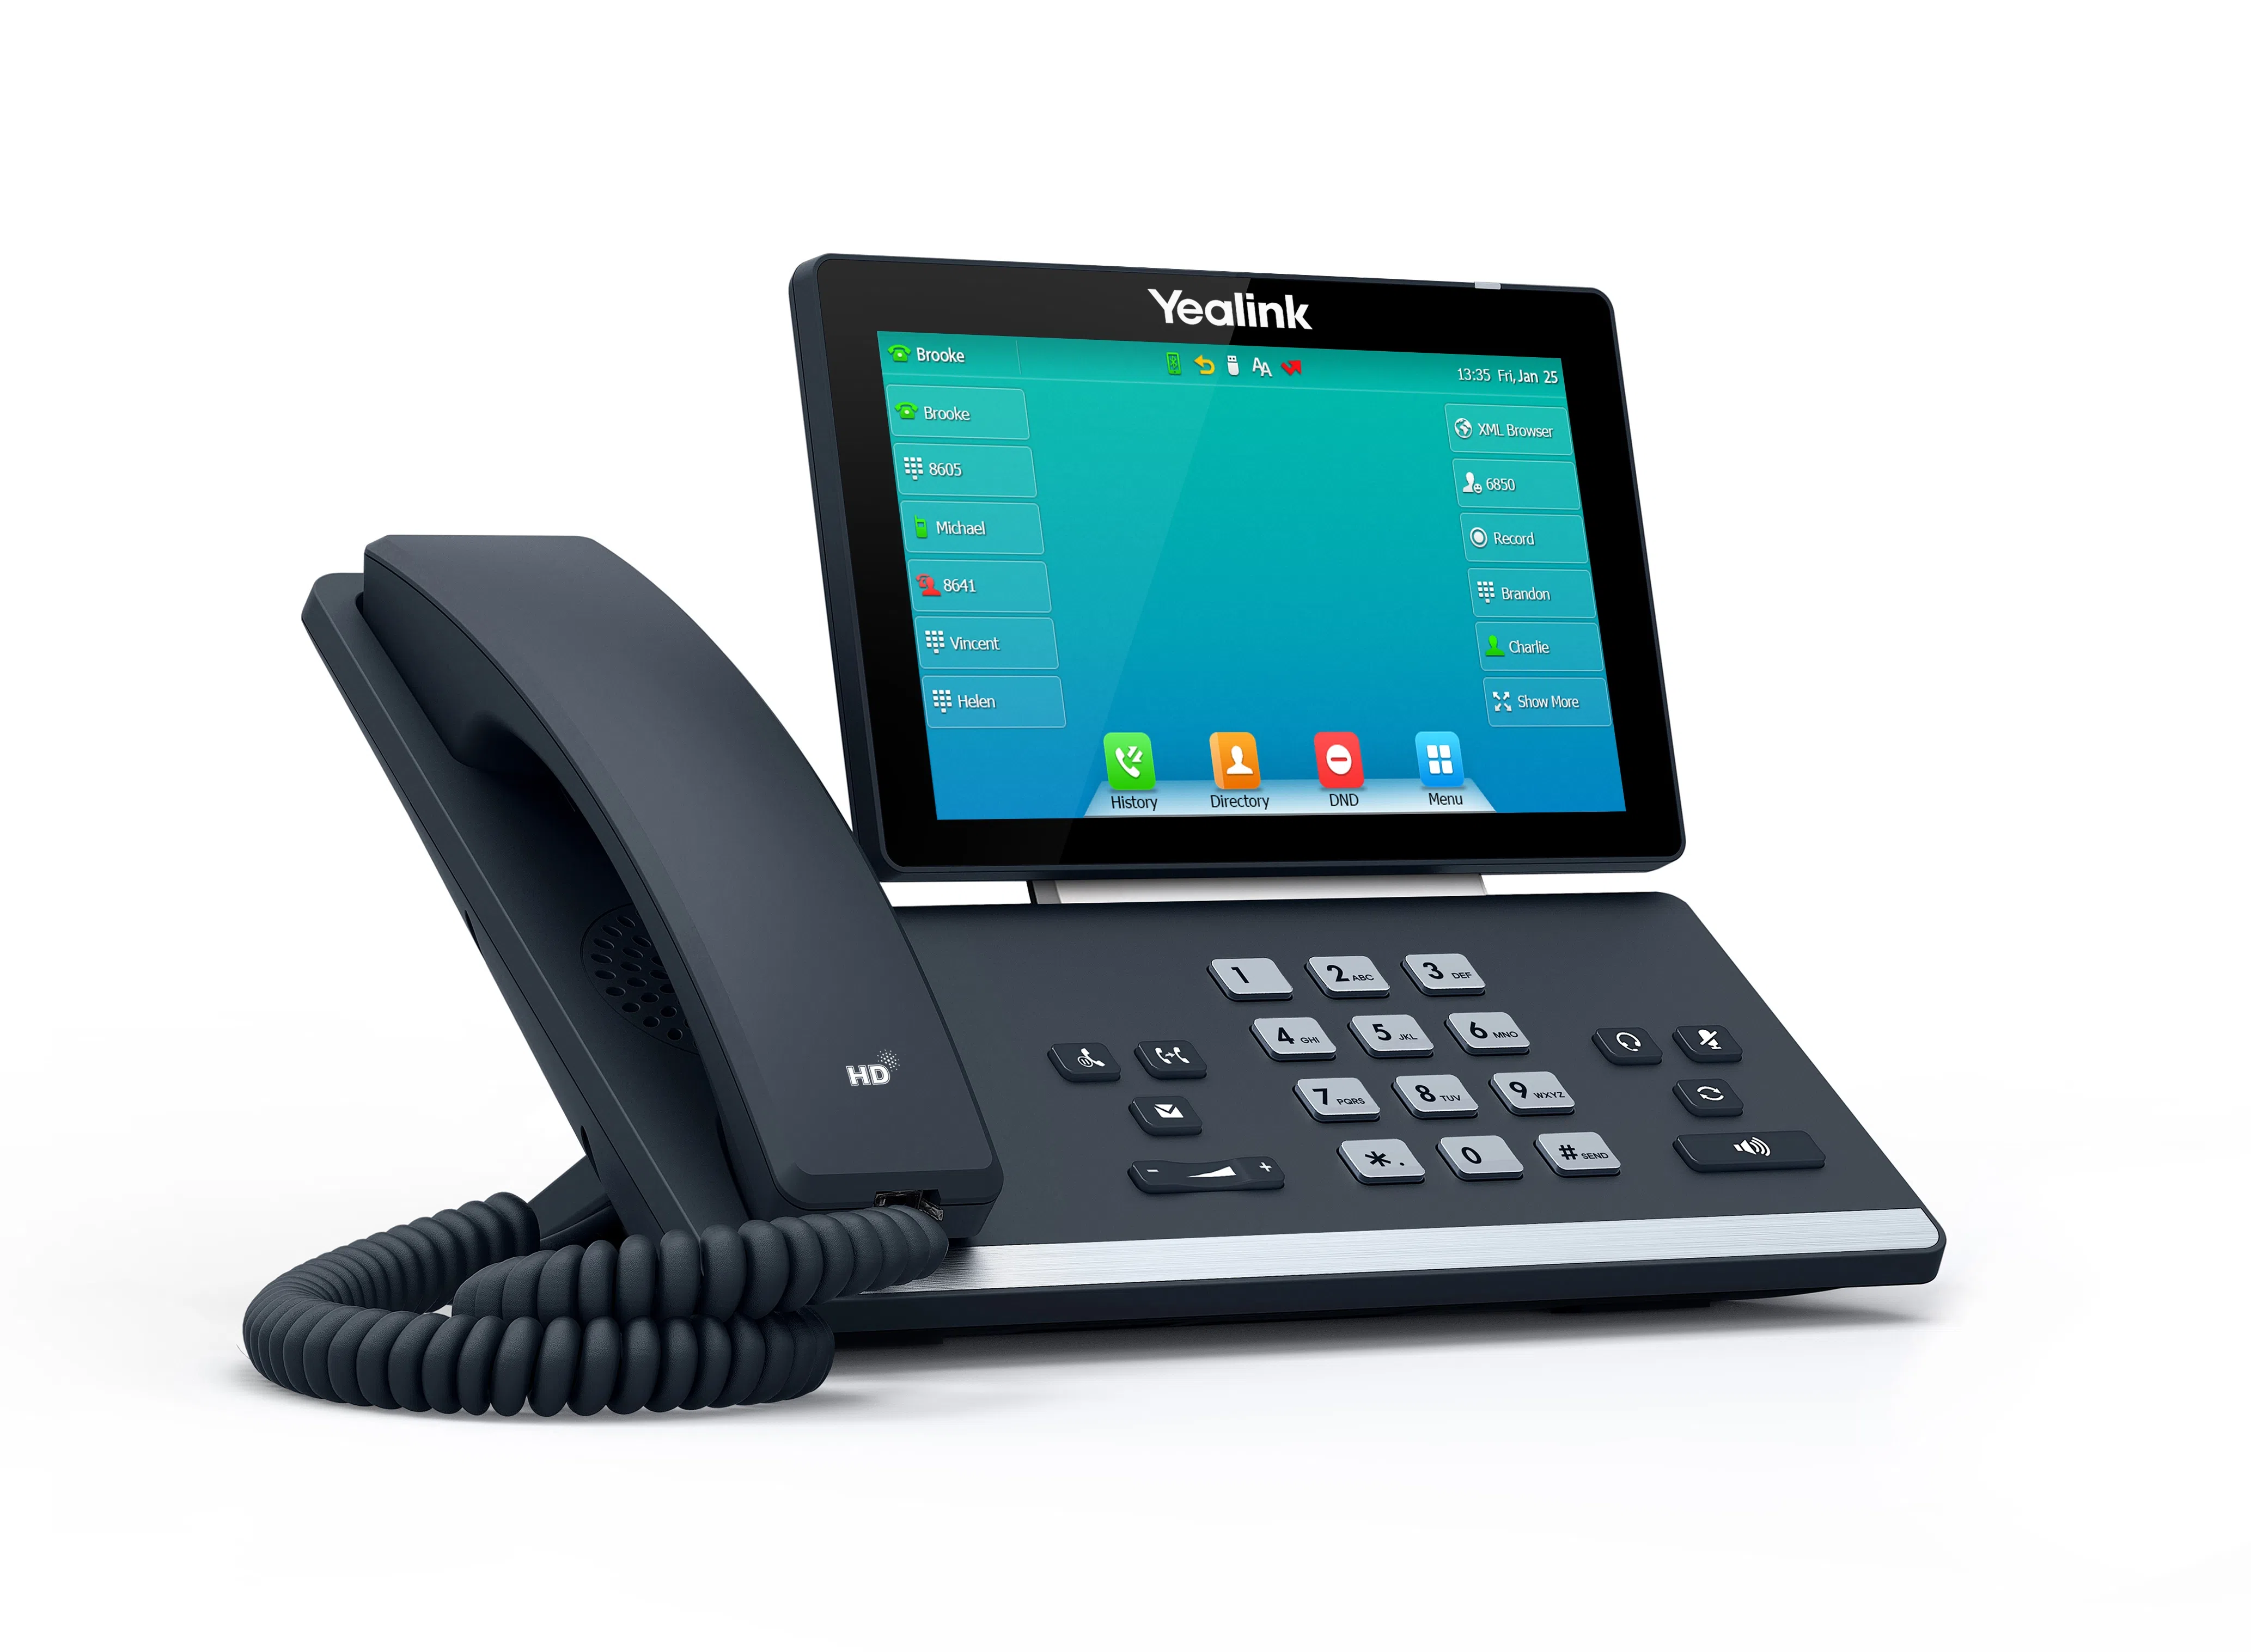 Can you provide the model number for the Yealink T57W Premium IP Phone?